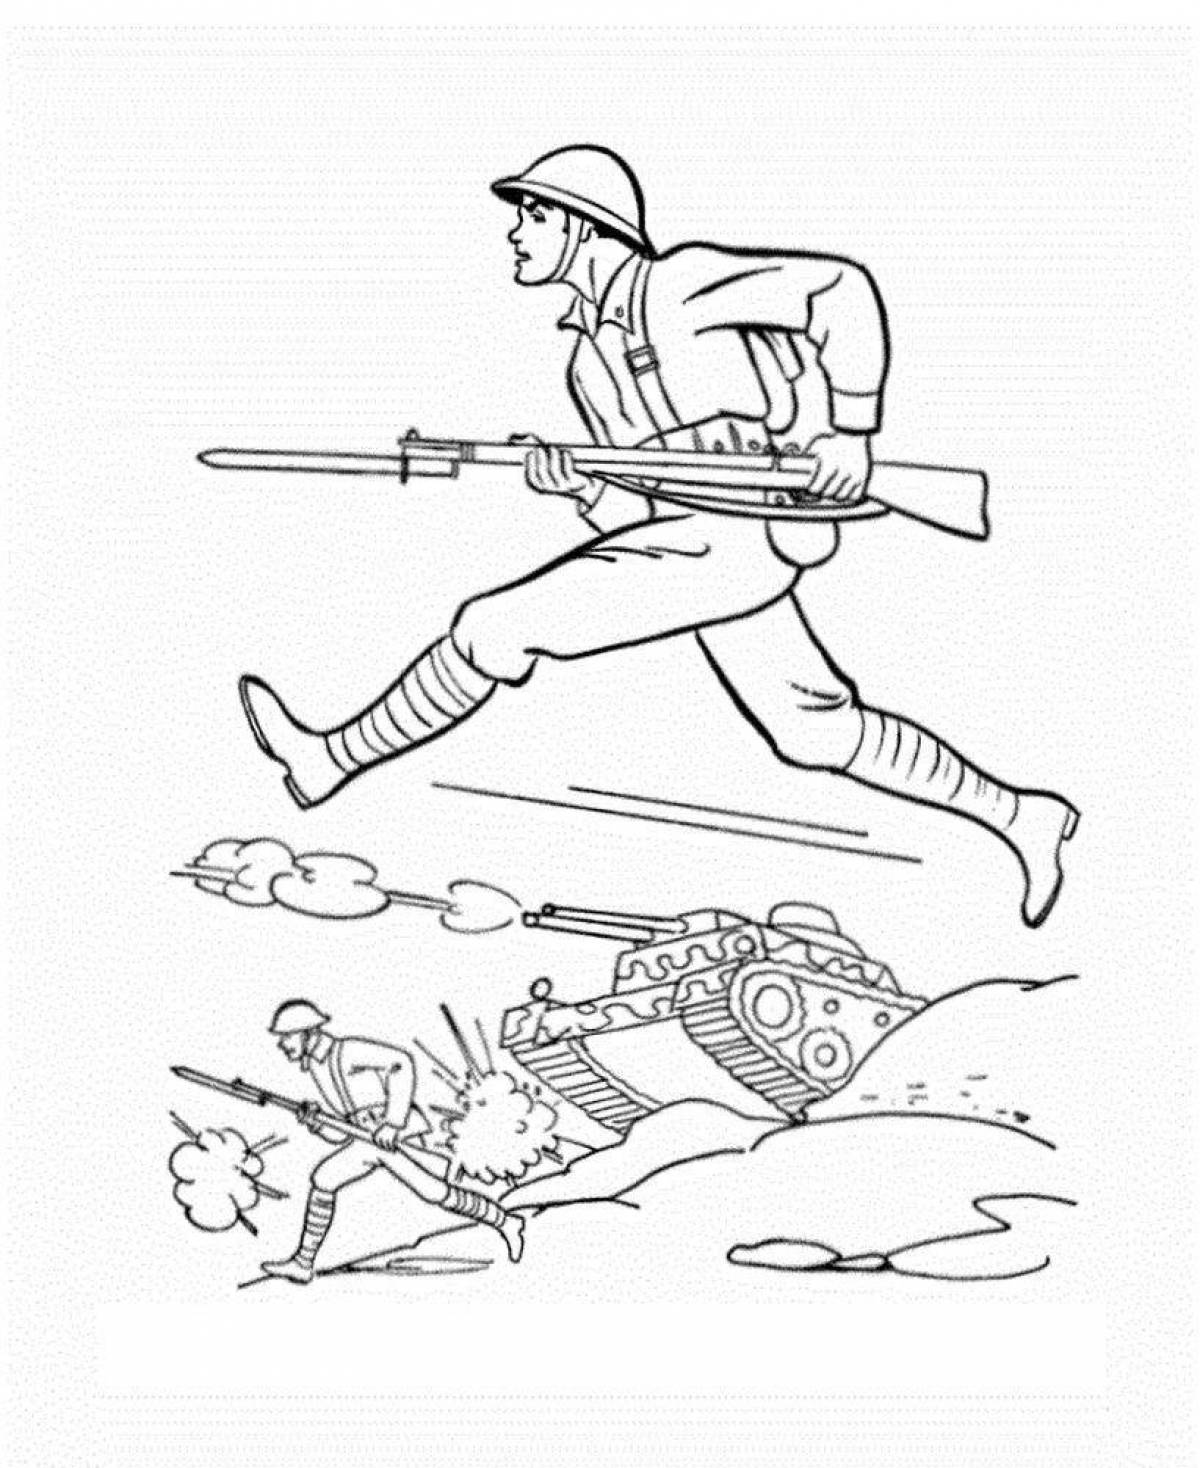 Energetic soldier and child's drawing